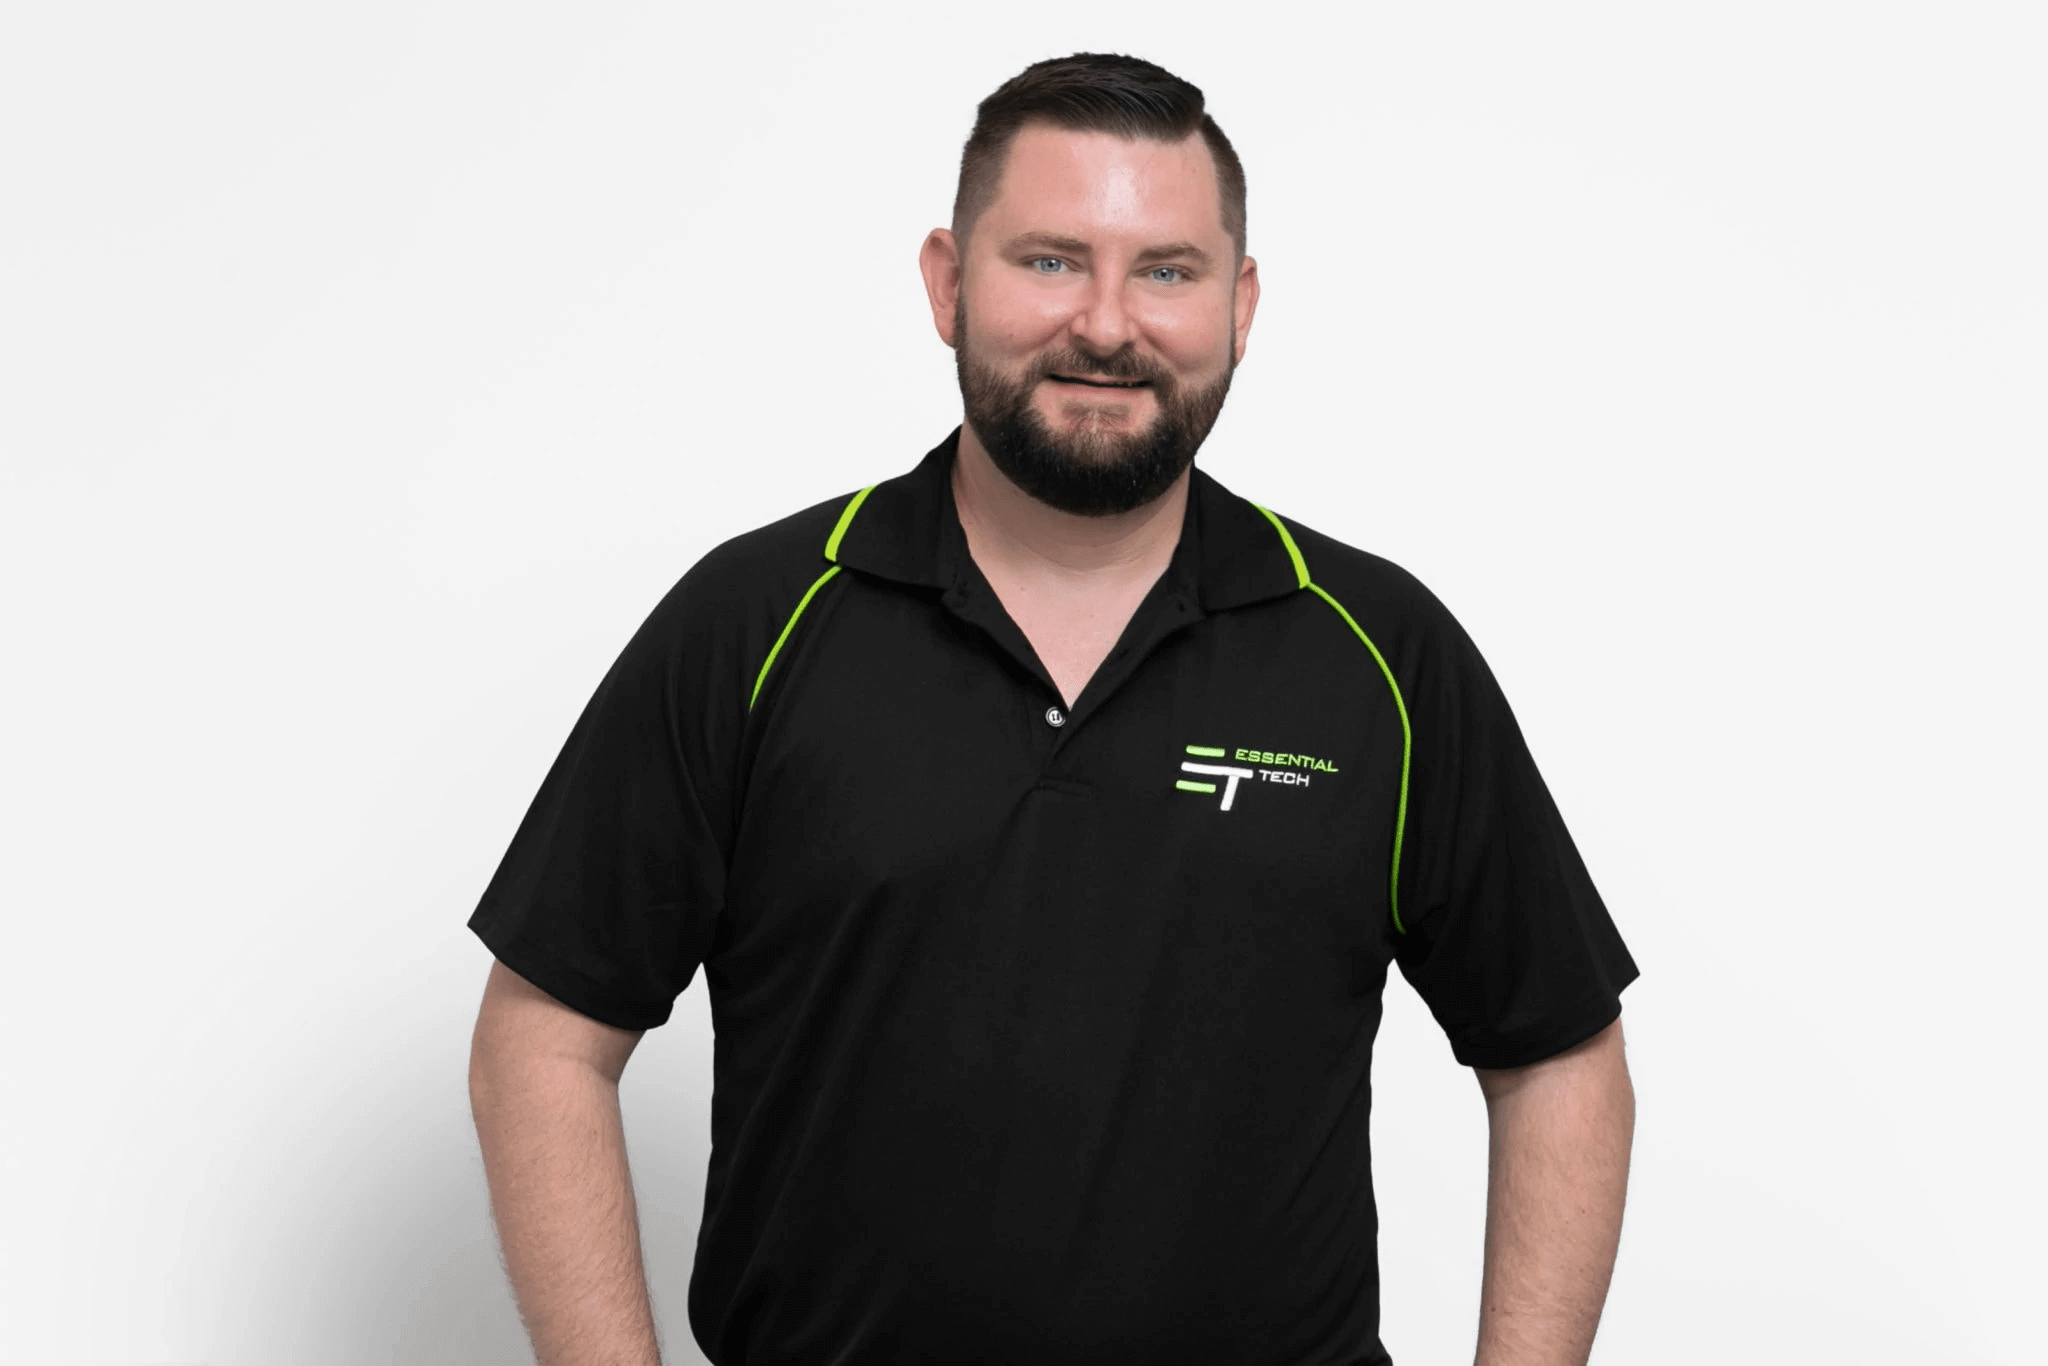 Brendan - Sales Manager at Essential Tech